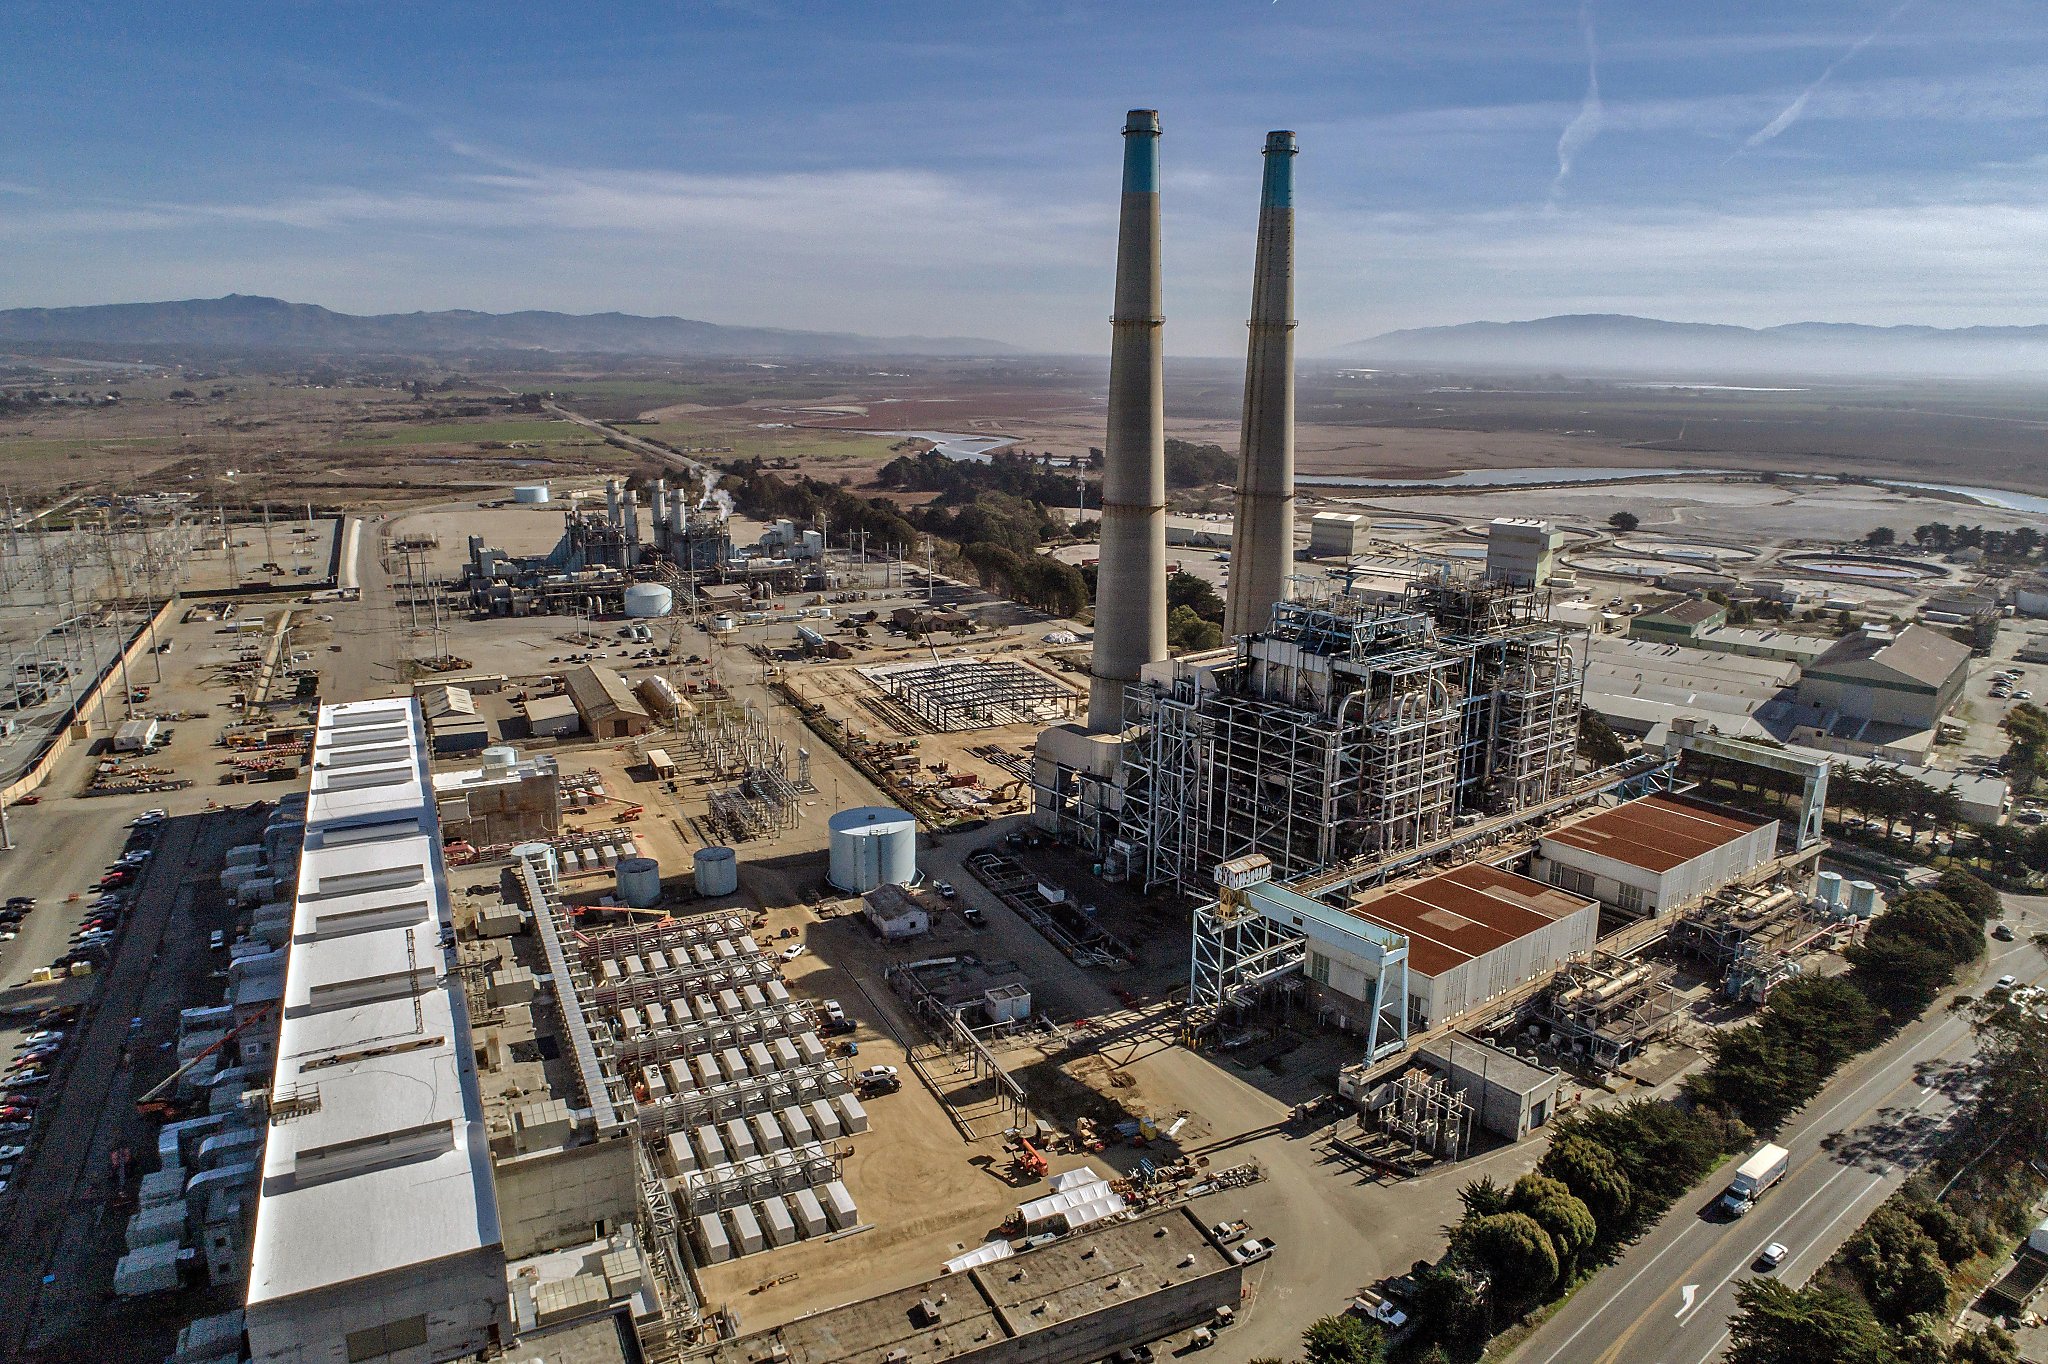 Monterey Bay power plant now a record-breaking battery project that could ward off outages